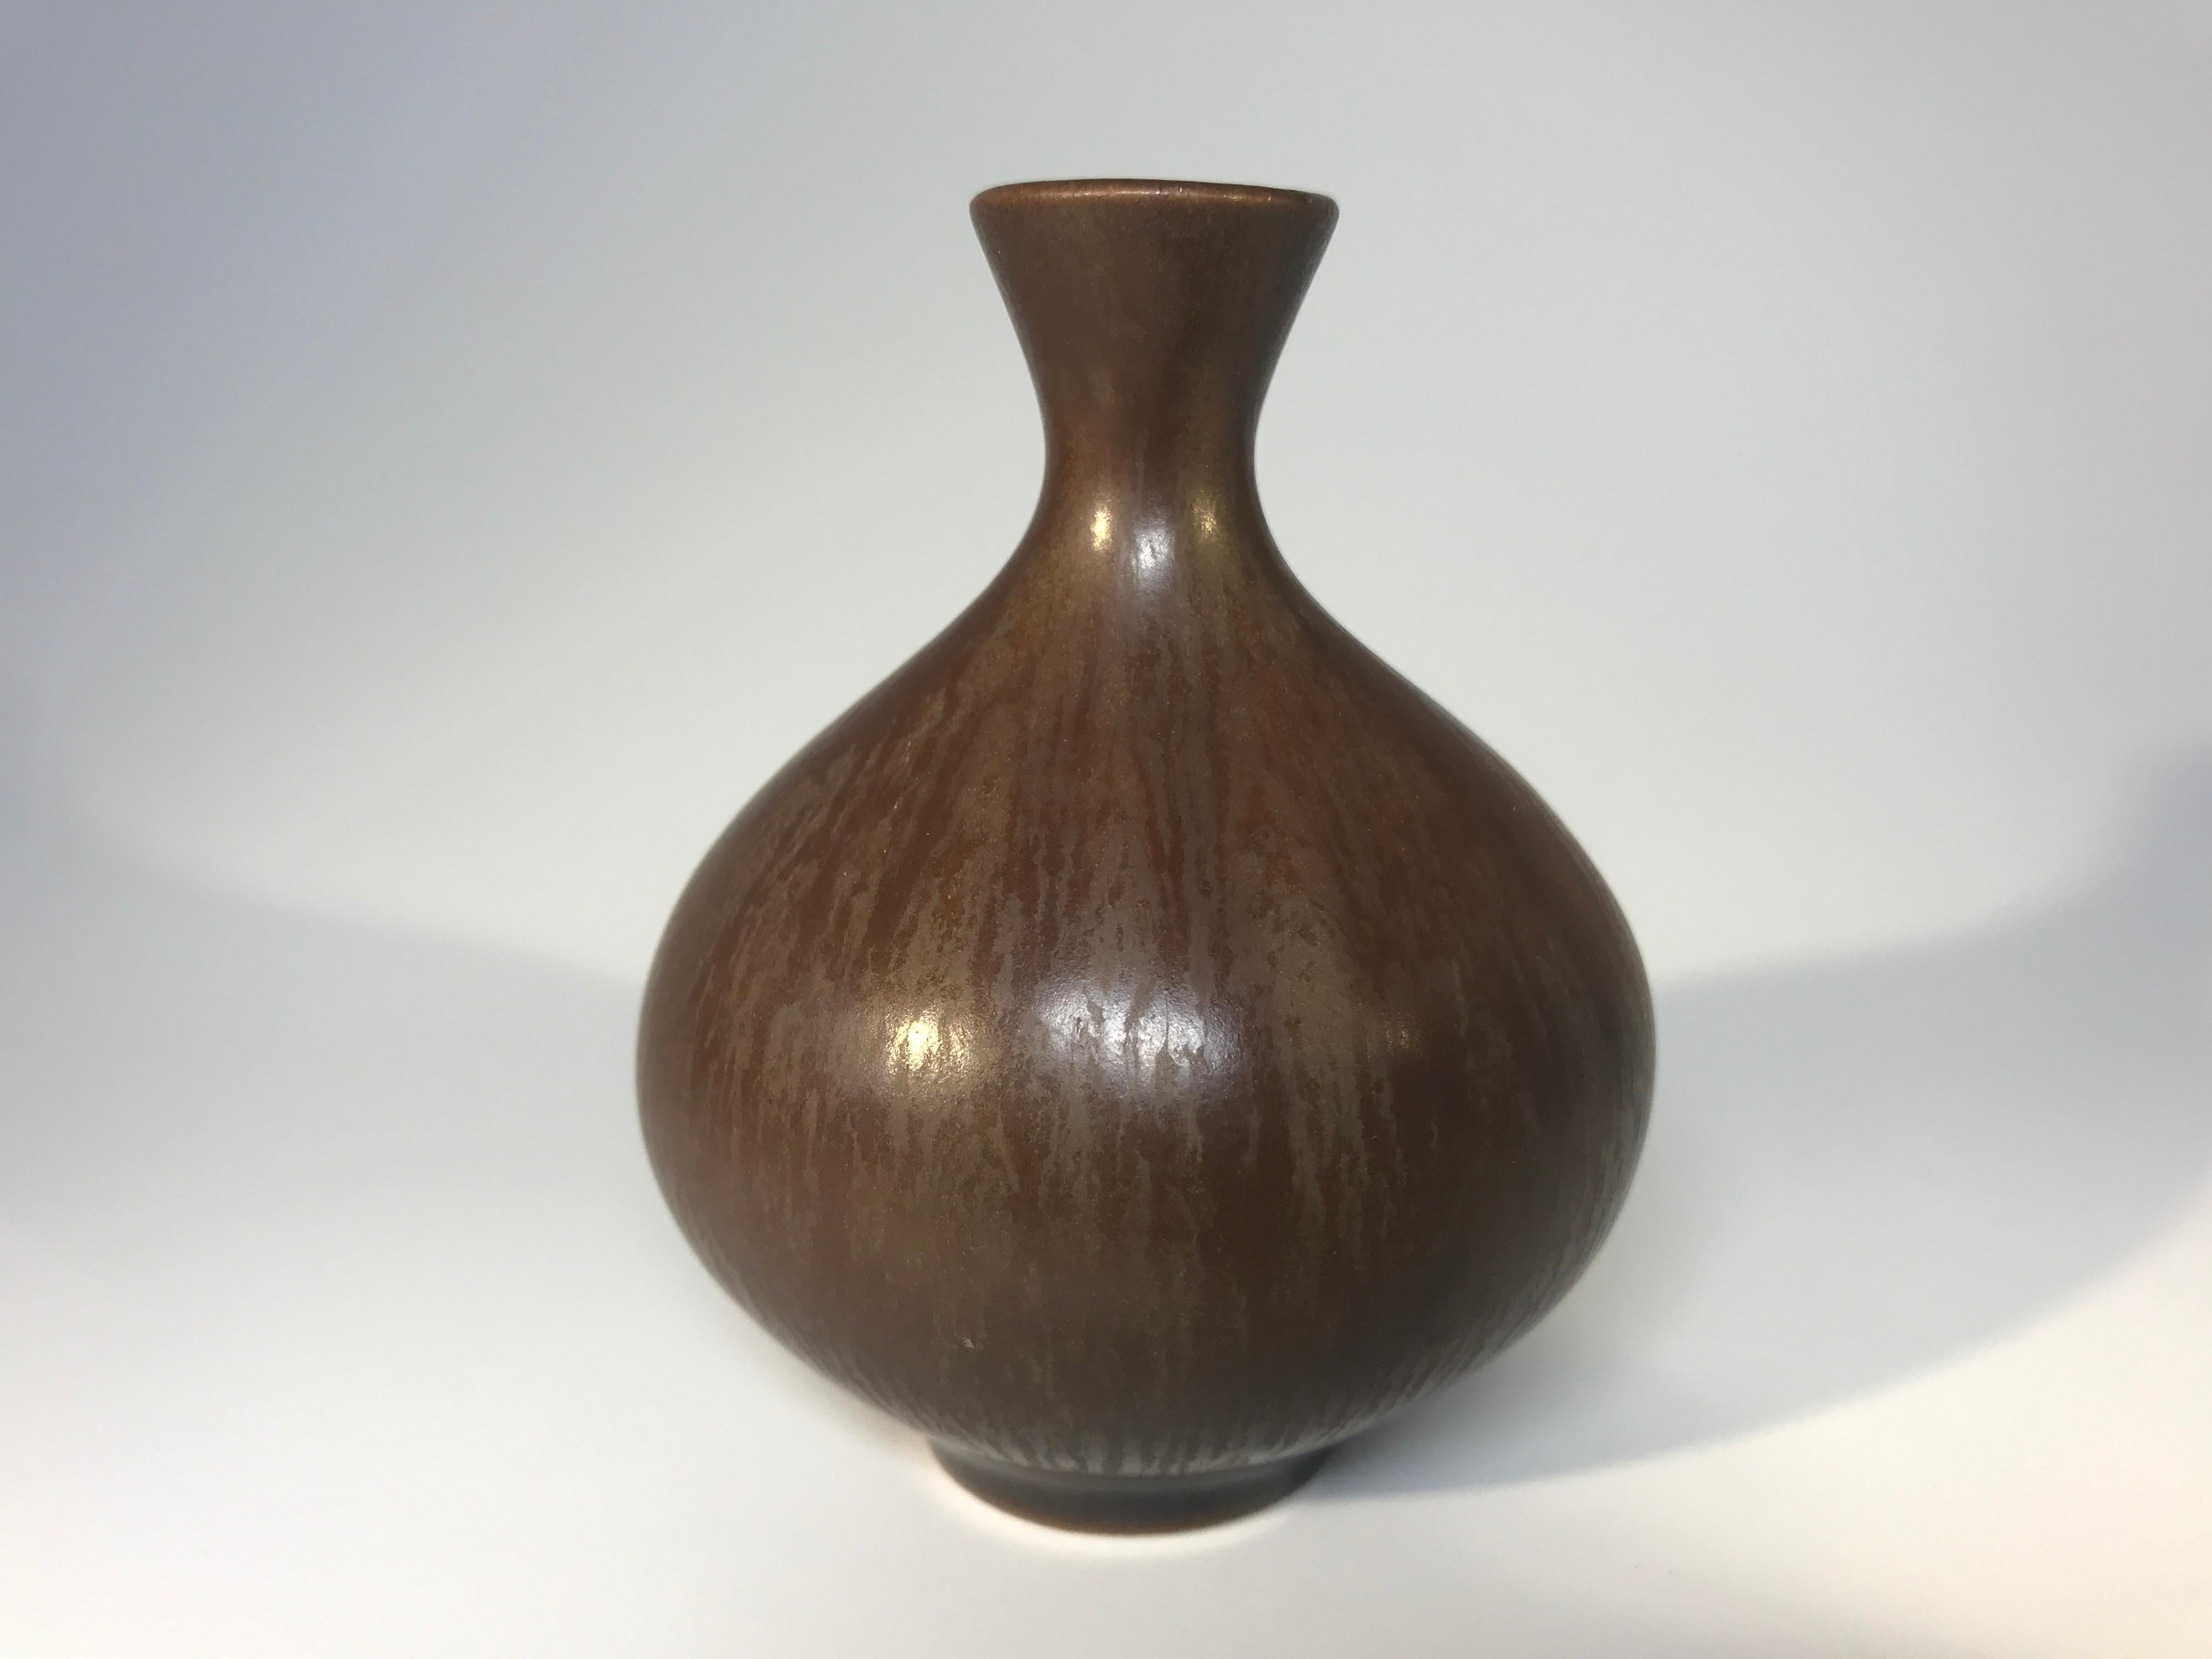 Signature Hares Fur glaze hand thrown miniature vase, attributed to Berndt Friberg for Gustavsberg, Sweden
Applied by hand, the glaze is often layered to achieve structure and depth
Berndt Friberg was influenced by Japanese and Chinese art -